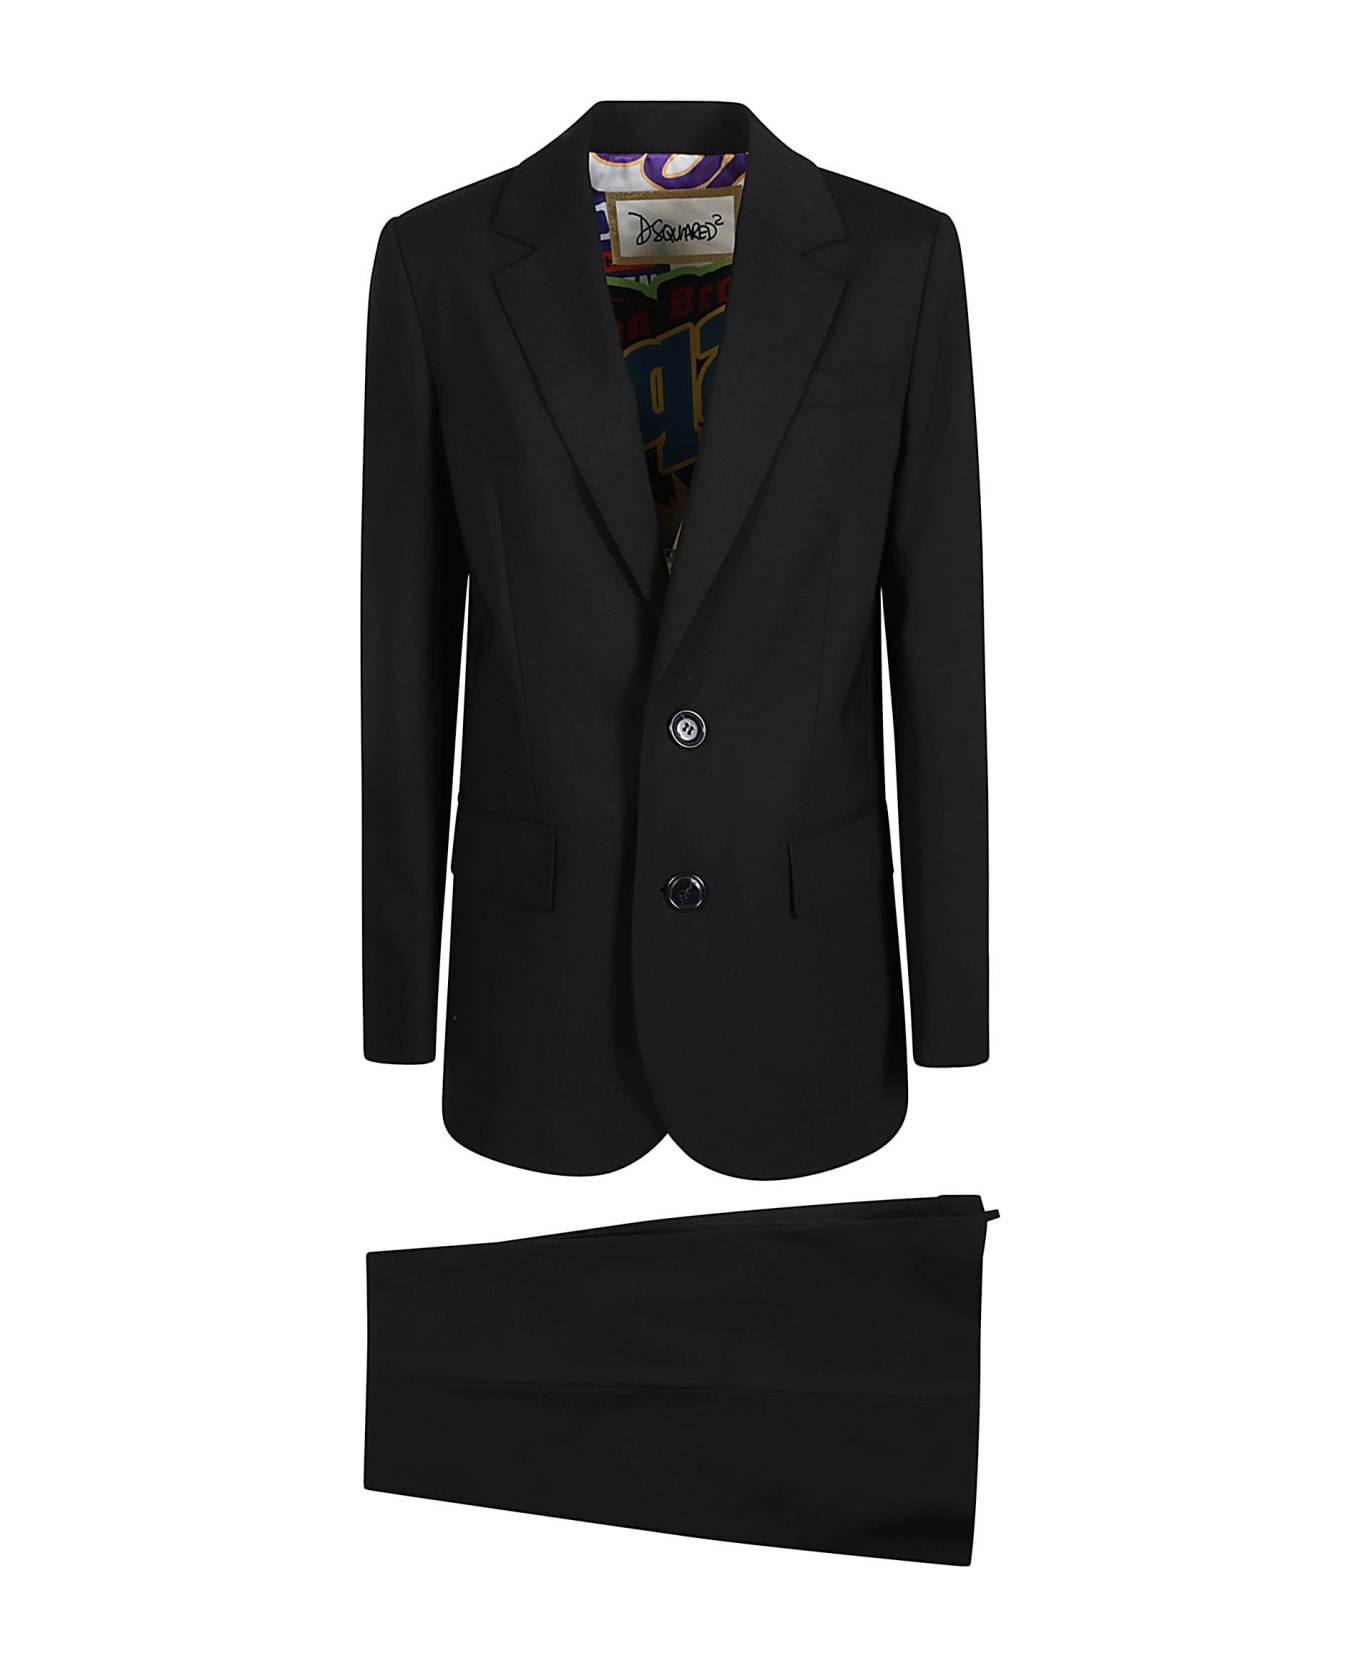 Dsquared2 Downtown Suit - Black ブレザー